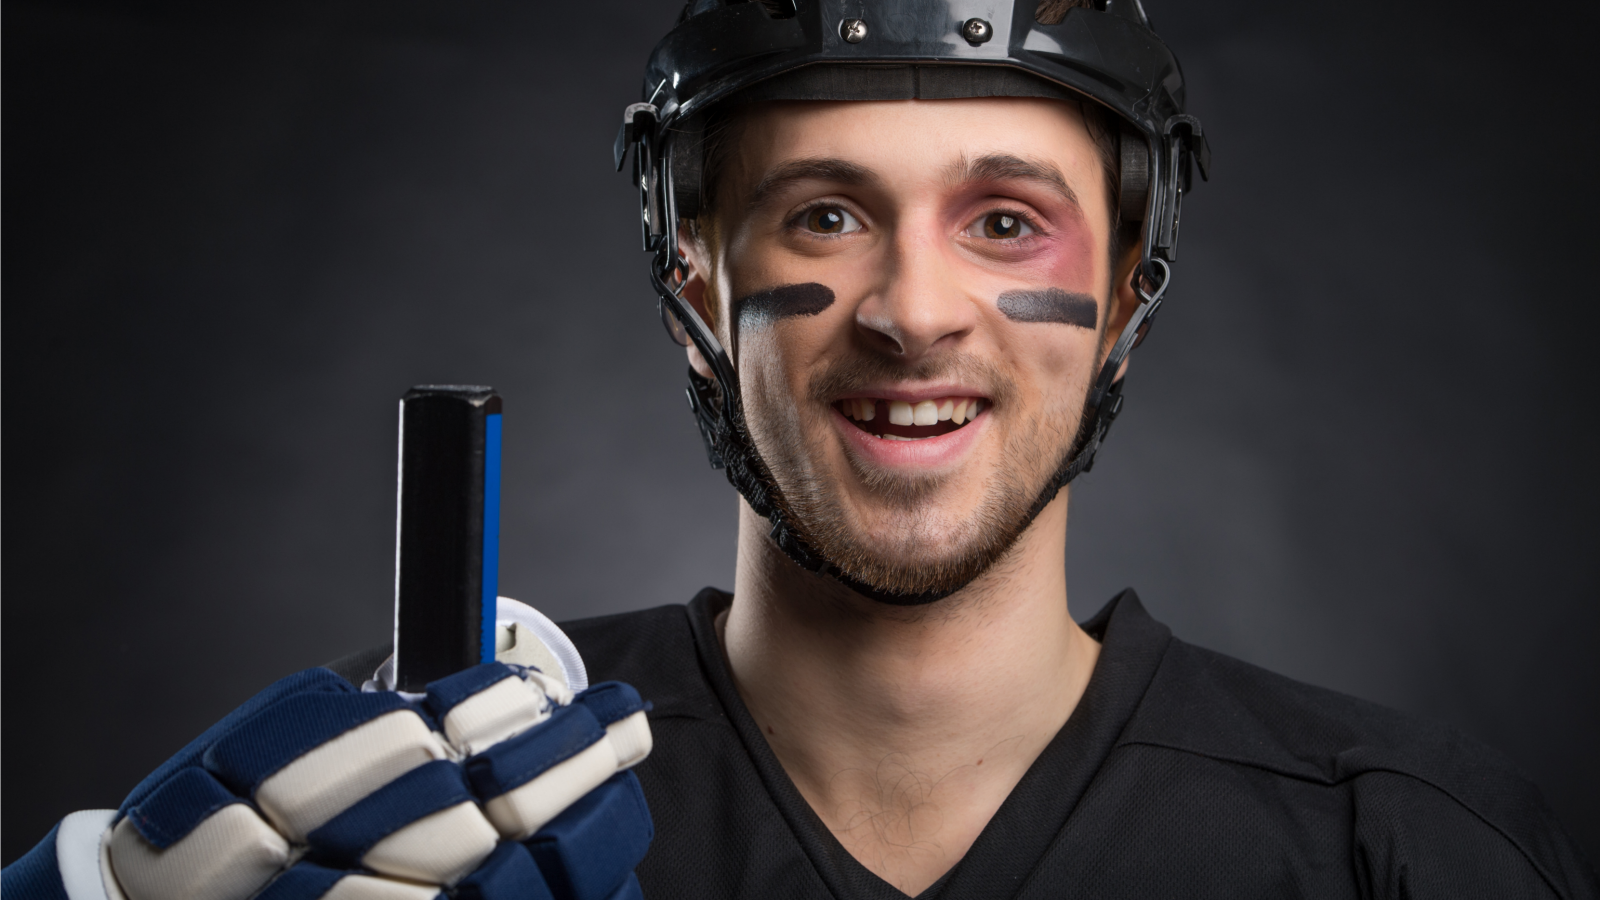 For NHL players, teeth come and go regularly